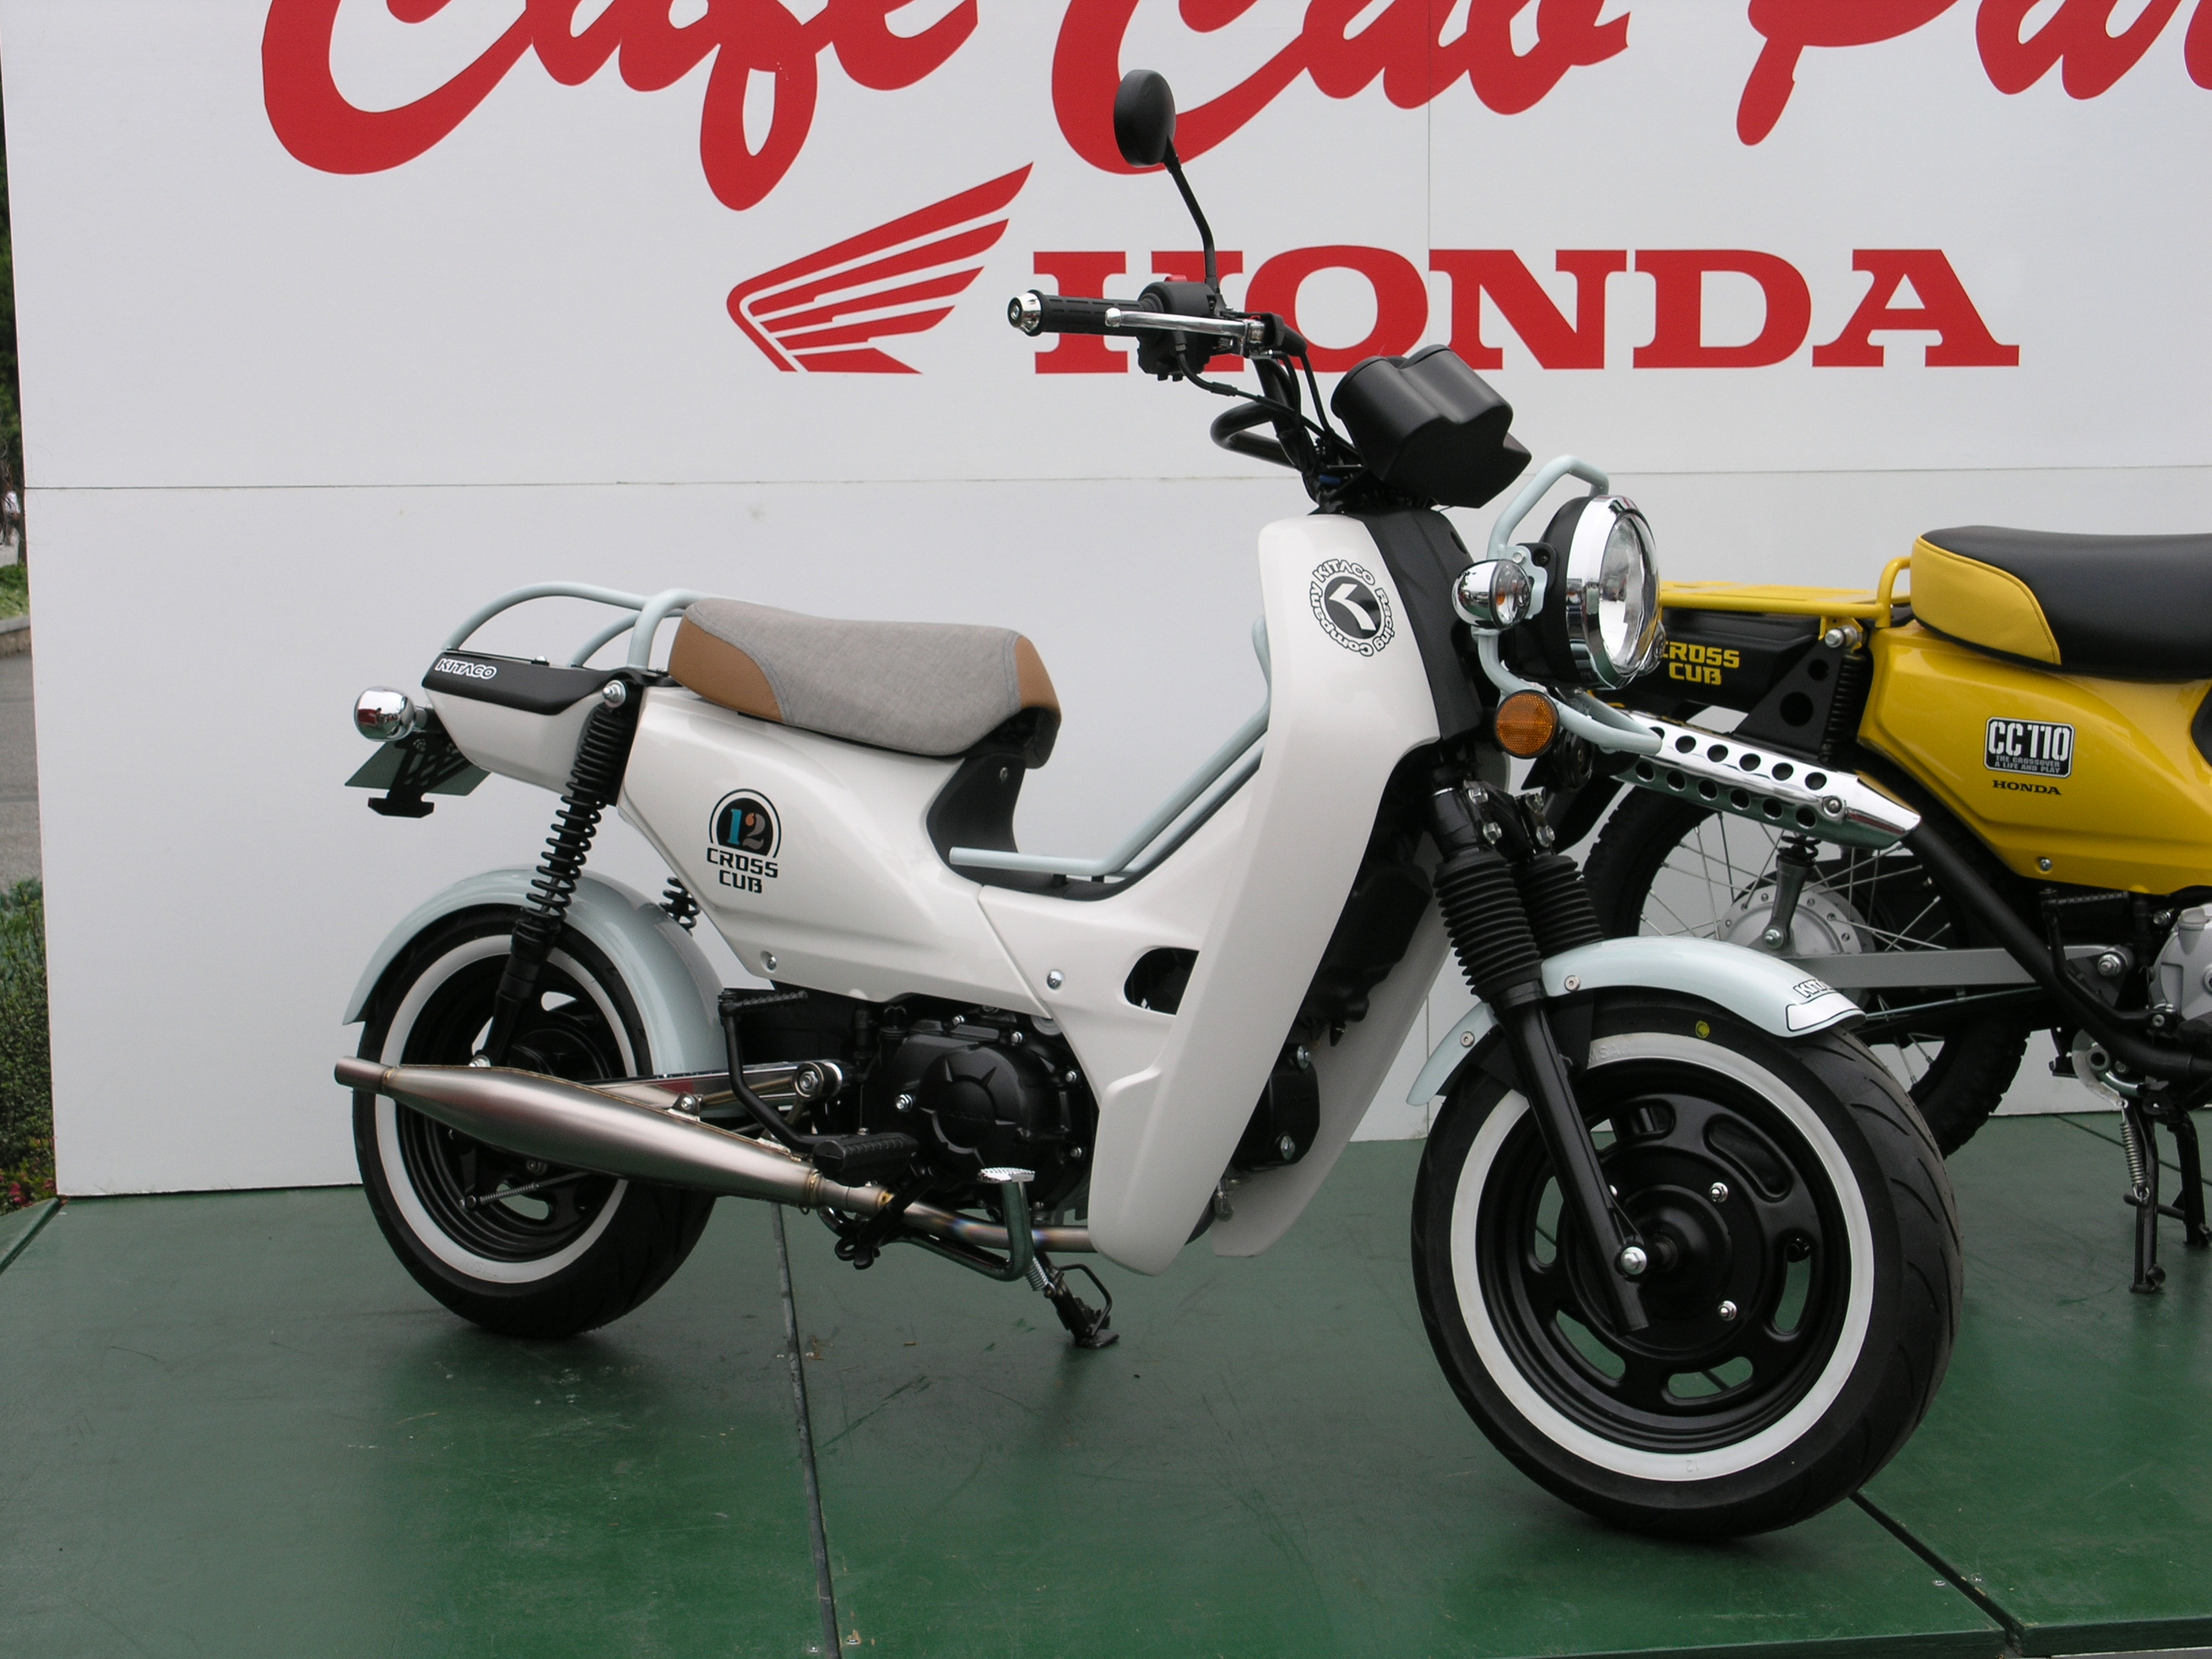 File Honda Crosscub Cc110 At Cafecub Party In Kyoto 13 05 Jpg Wikimedia Commons